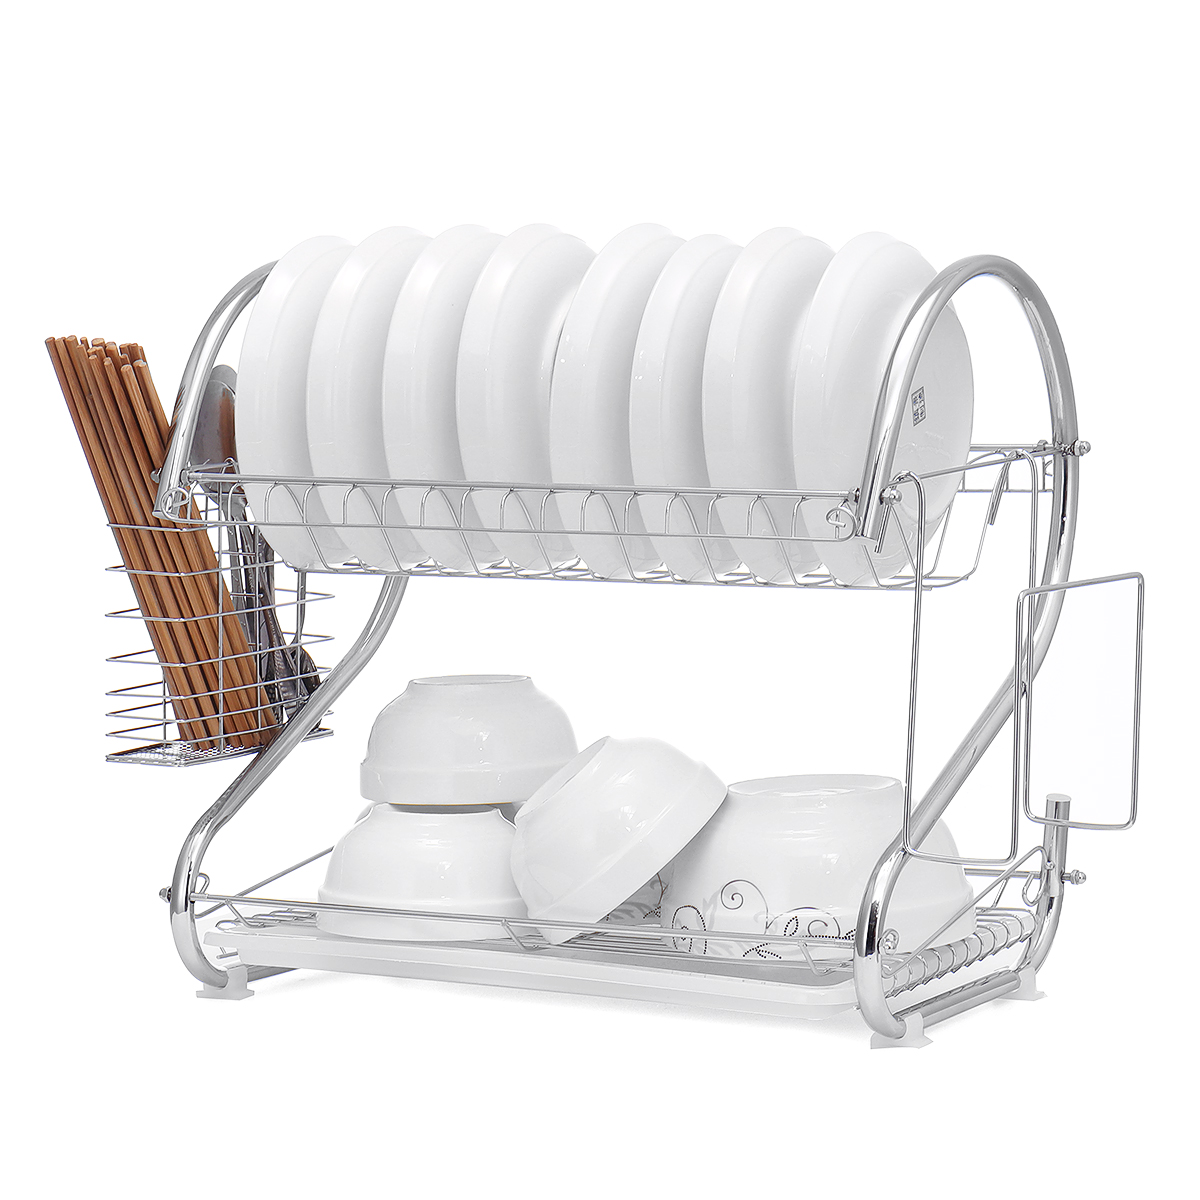 Dish-Drying-Rack-2-Tier-Dish-Rack-with-Utensil-Holder-Cup-Holder-and-Dish-Drainer-for-Kitchen-Counte-1665917-8